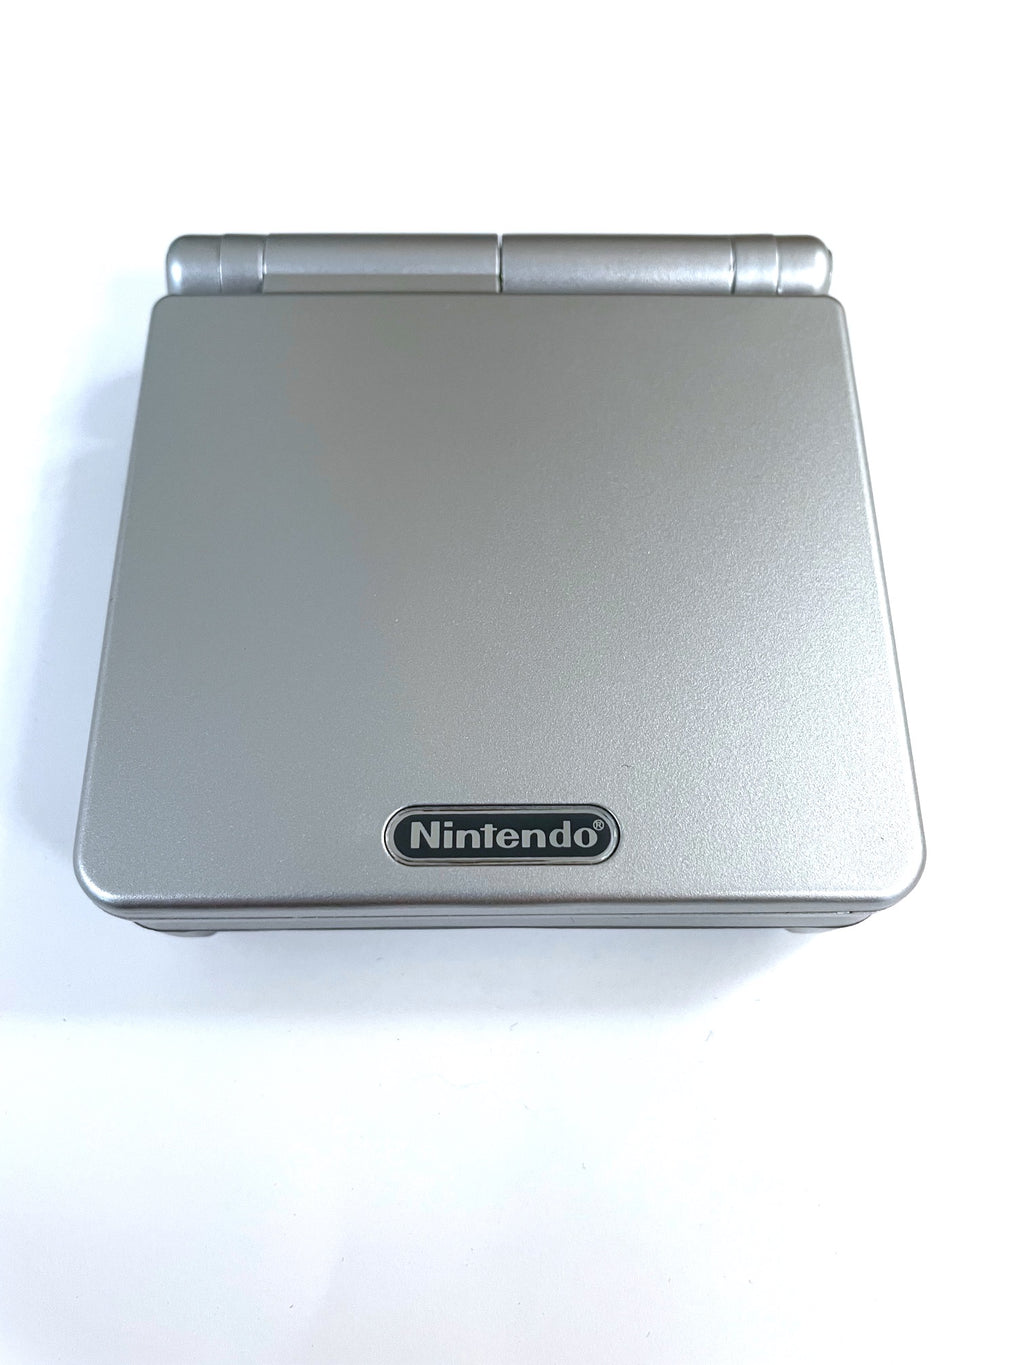 Gameboy Advance SP Platinum Handheld System w/ Charger! – The Game Island